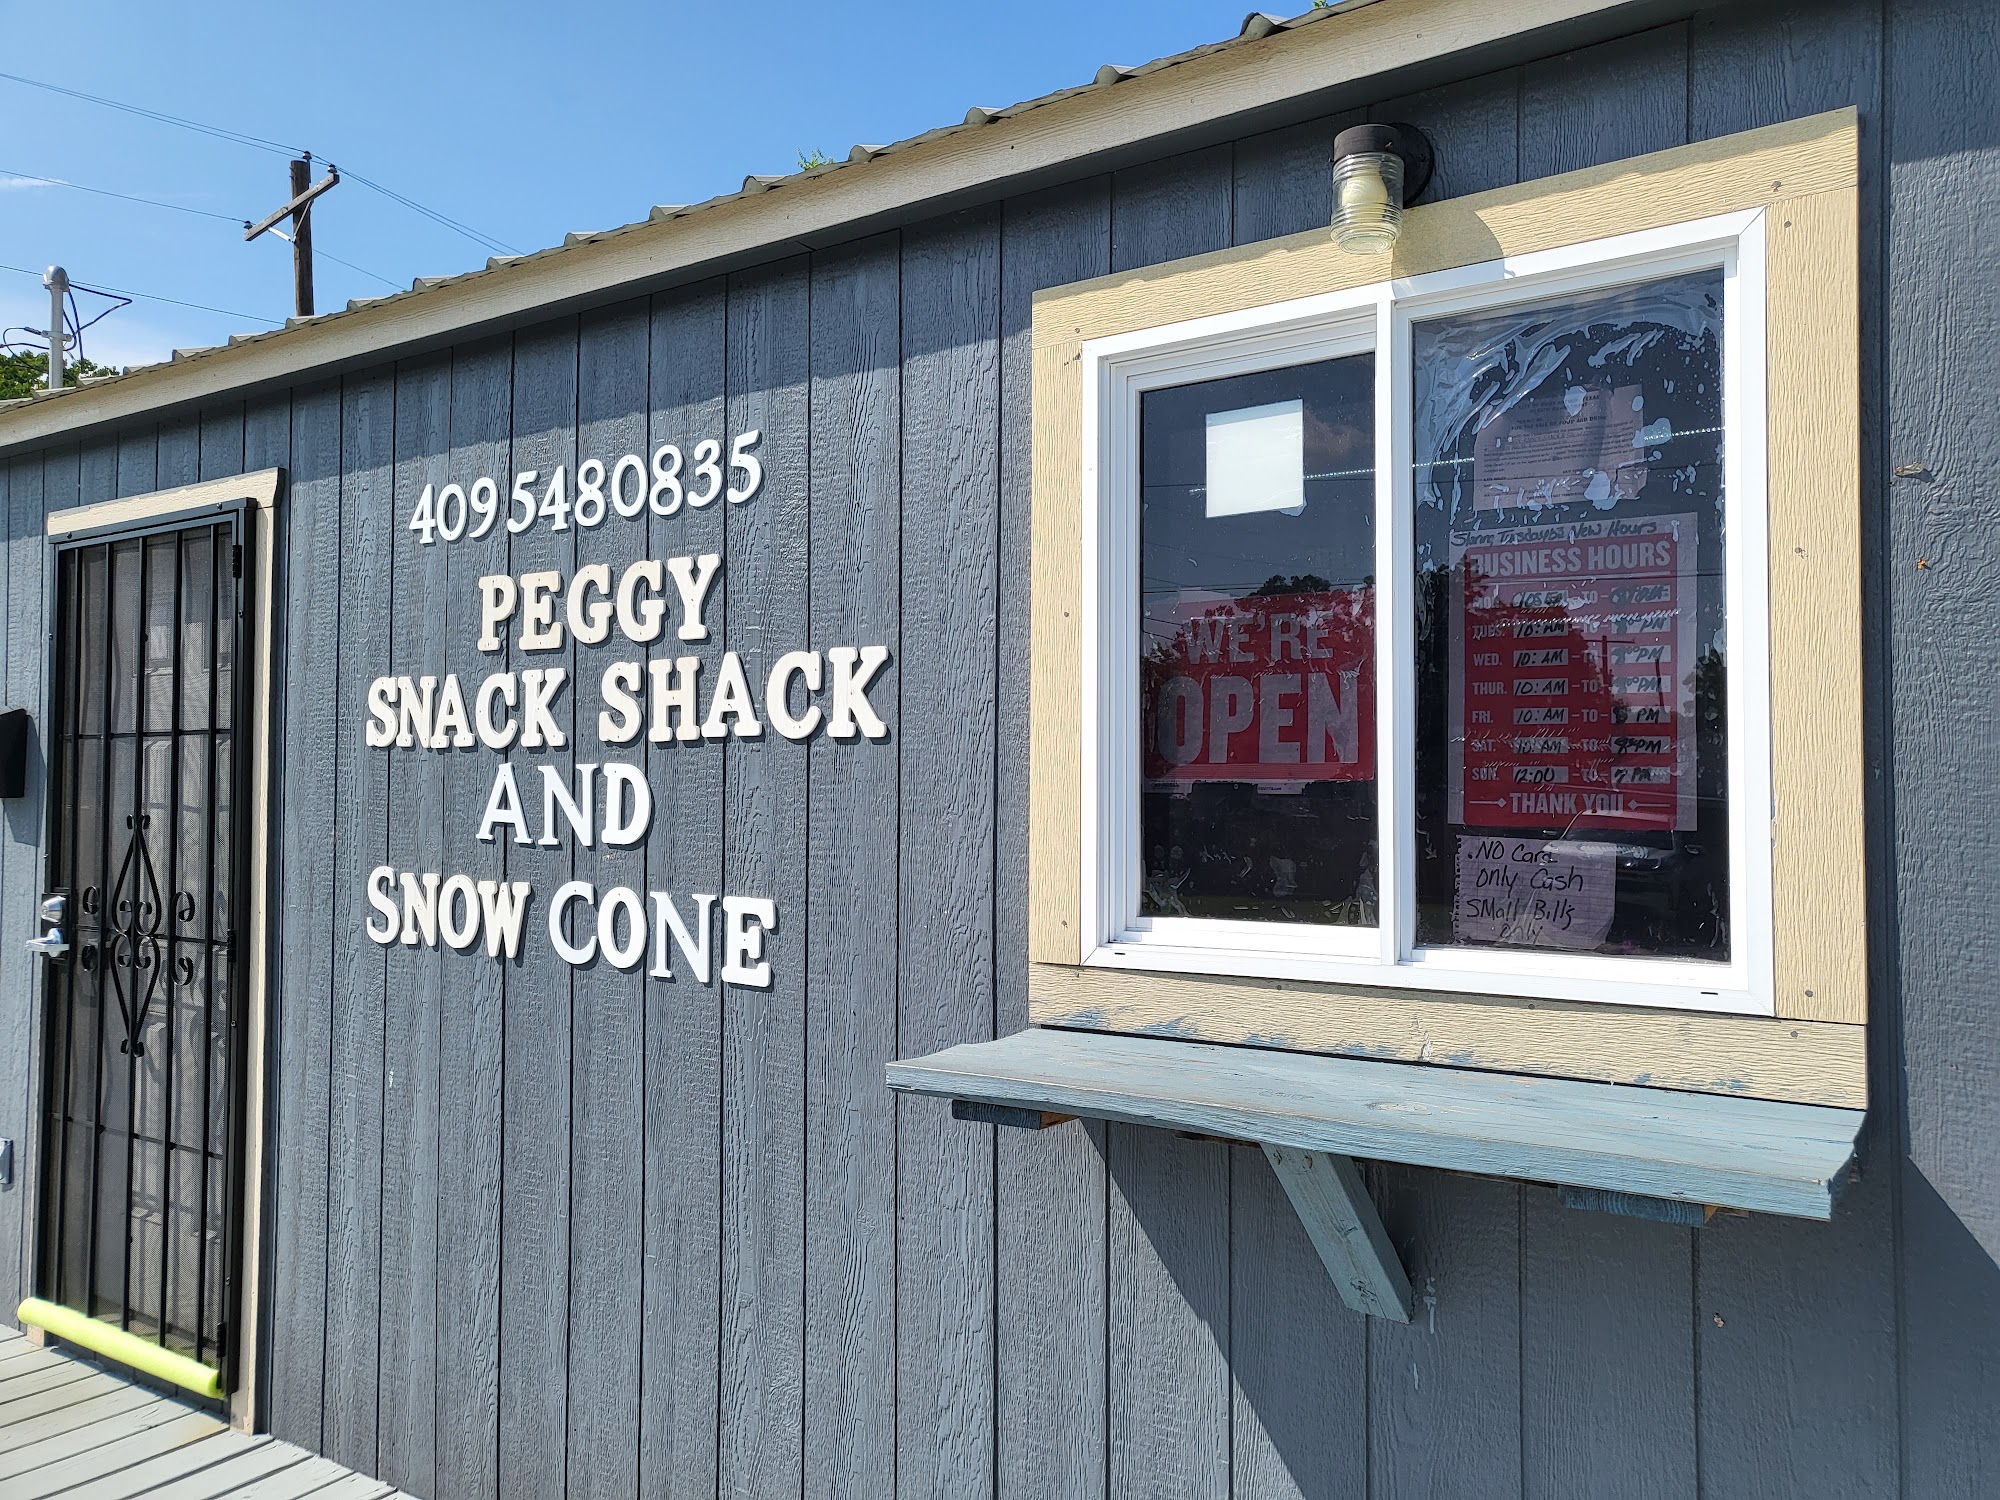 Peggy's Snack Shack & Snow Cone